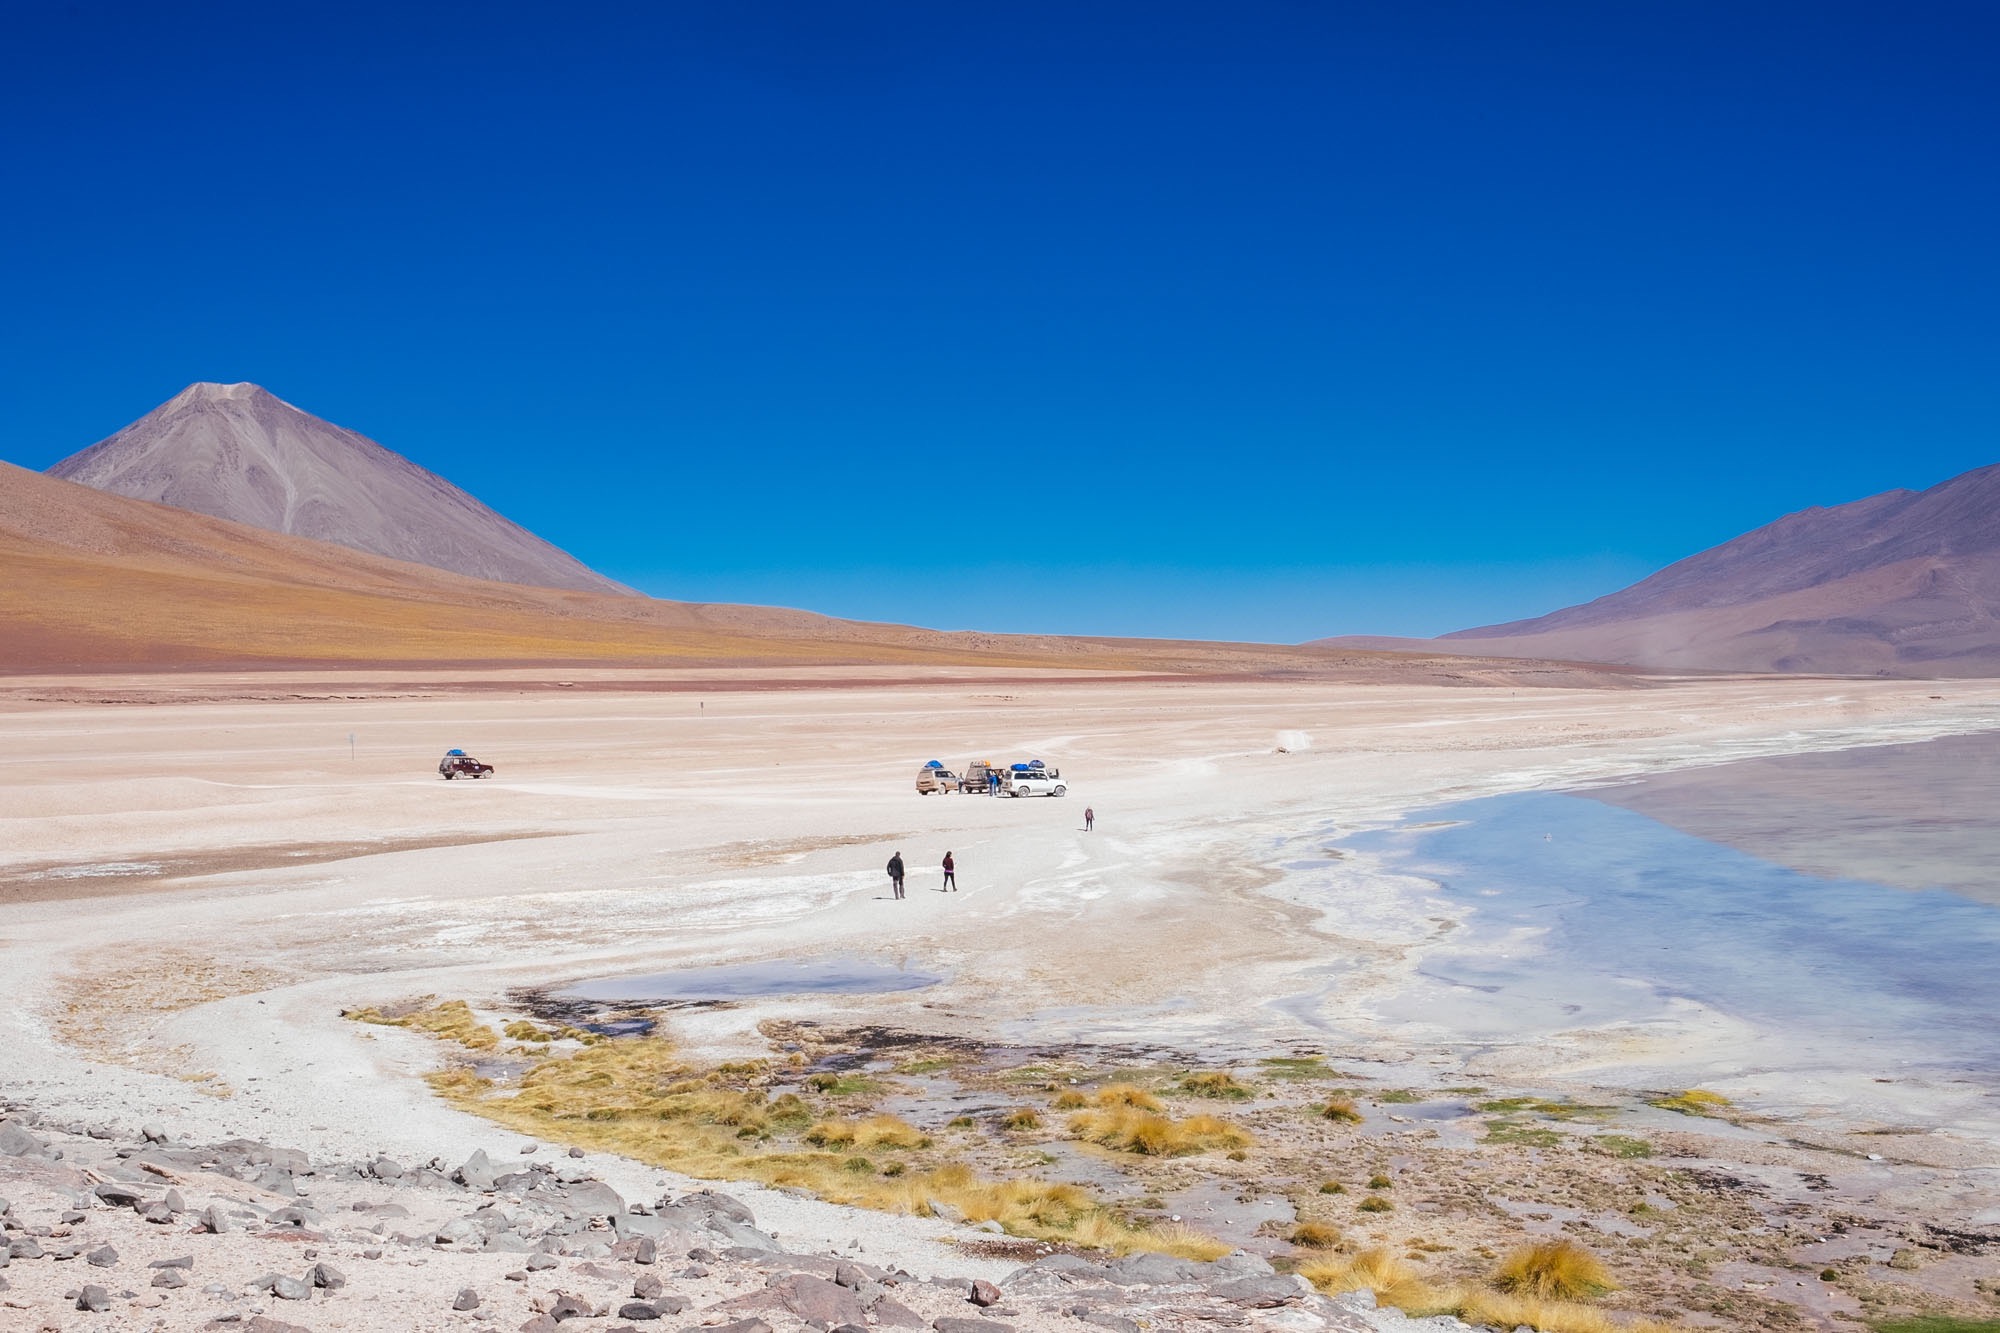 TRAVELING SOUTH AMERICA SOLO BY JENNIFER EMERLING — Spirited Pursuit